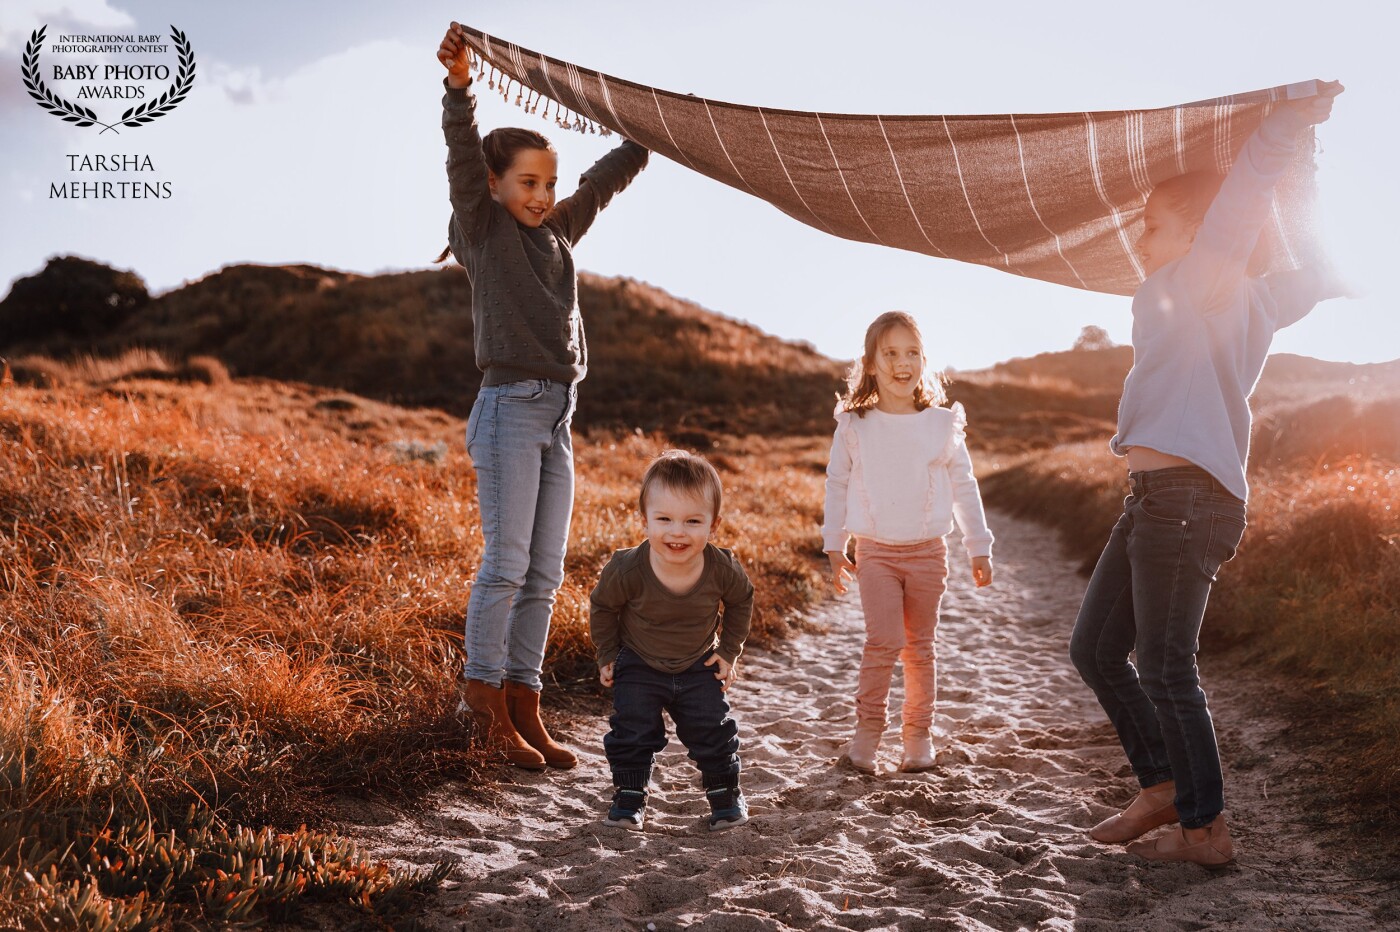 A gorgeous sunset session with these four children at Papamoa Beach, Bay of Plenty, New Zealand.  Lots of fun and laughter playing with the towel to get beautiful smiles.